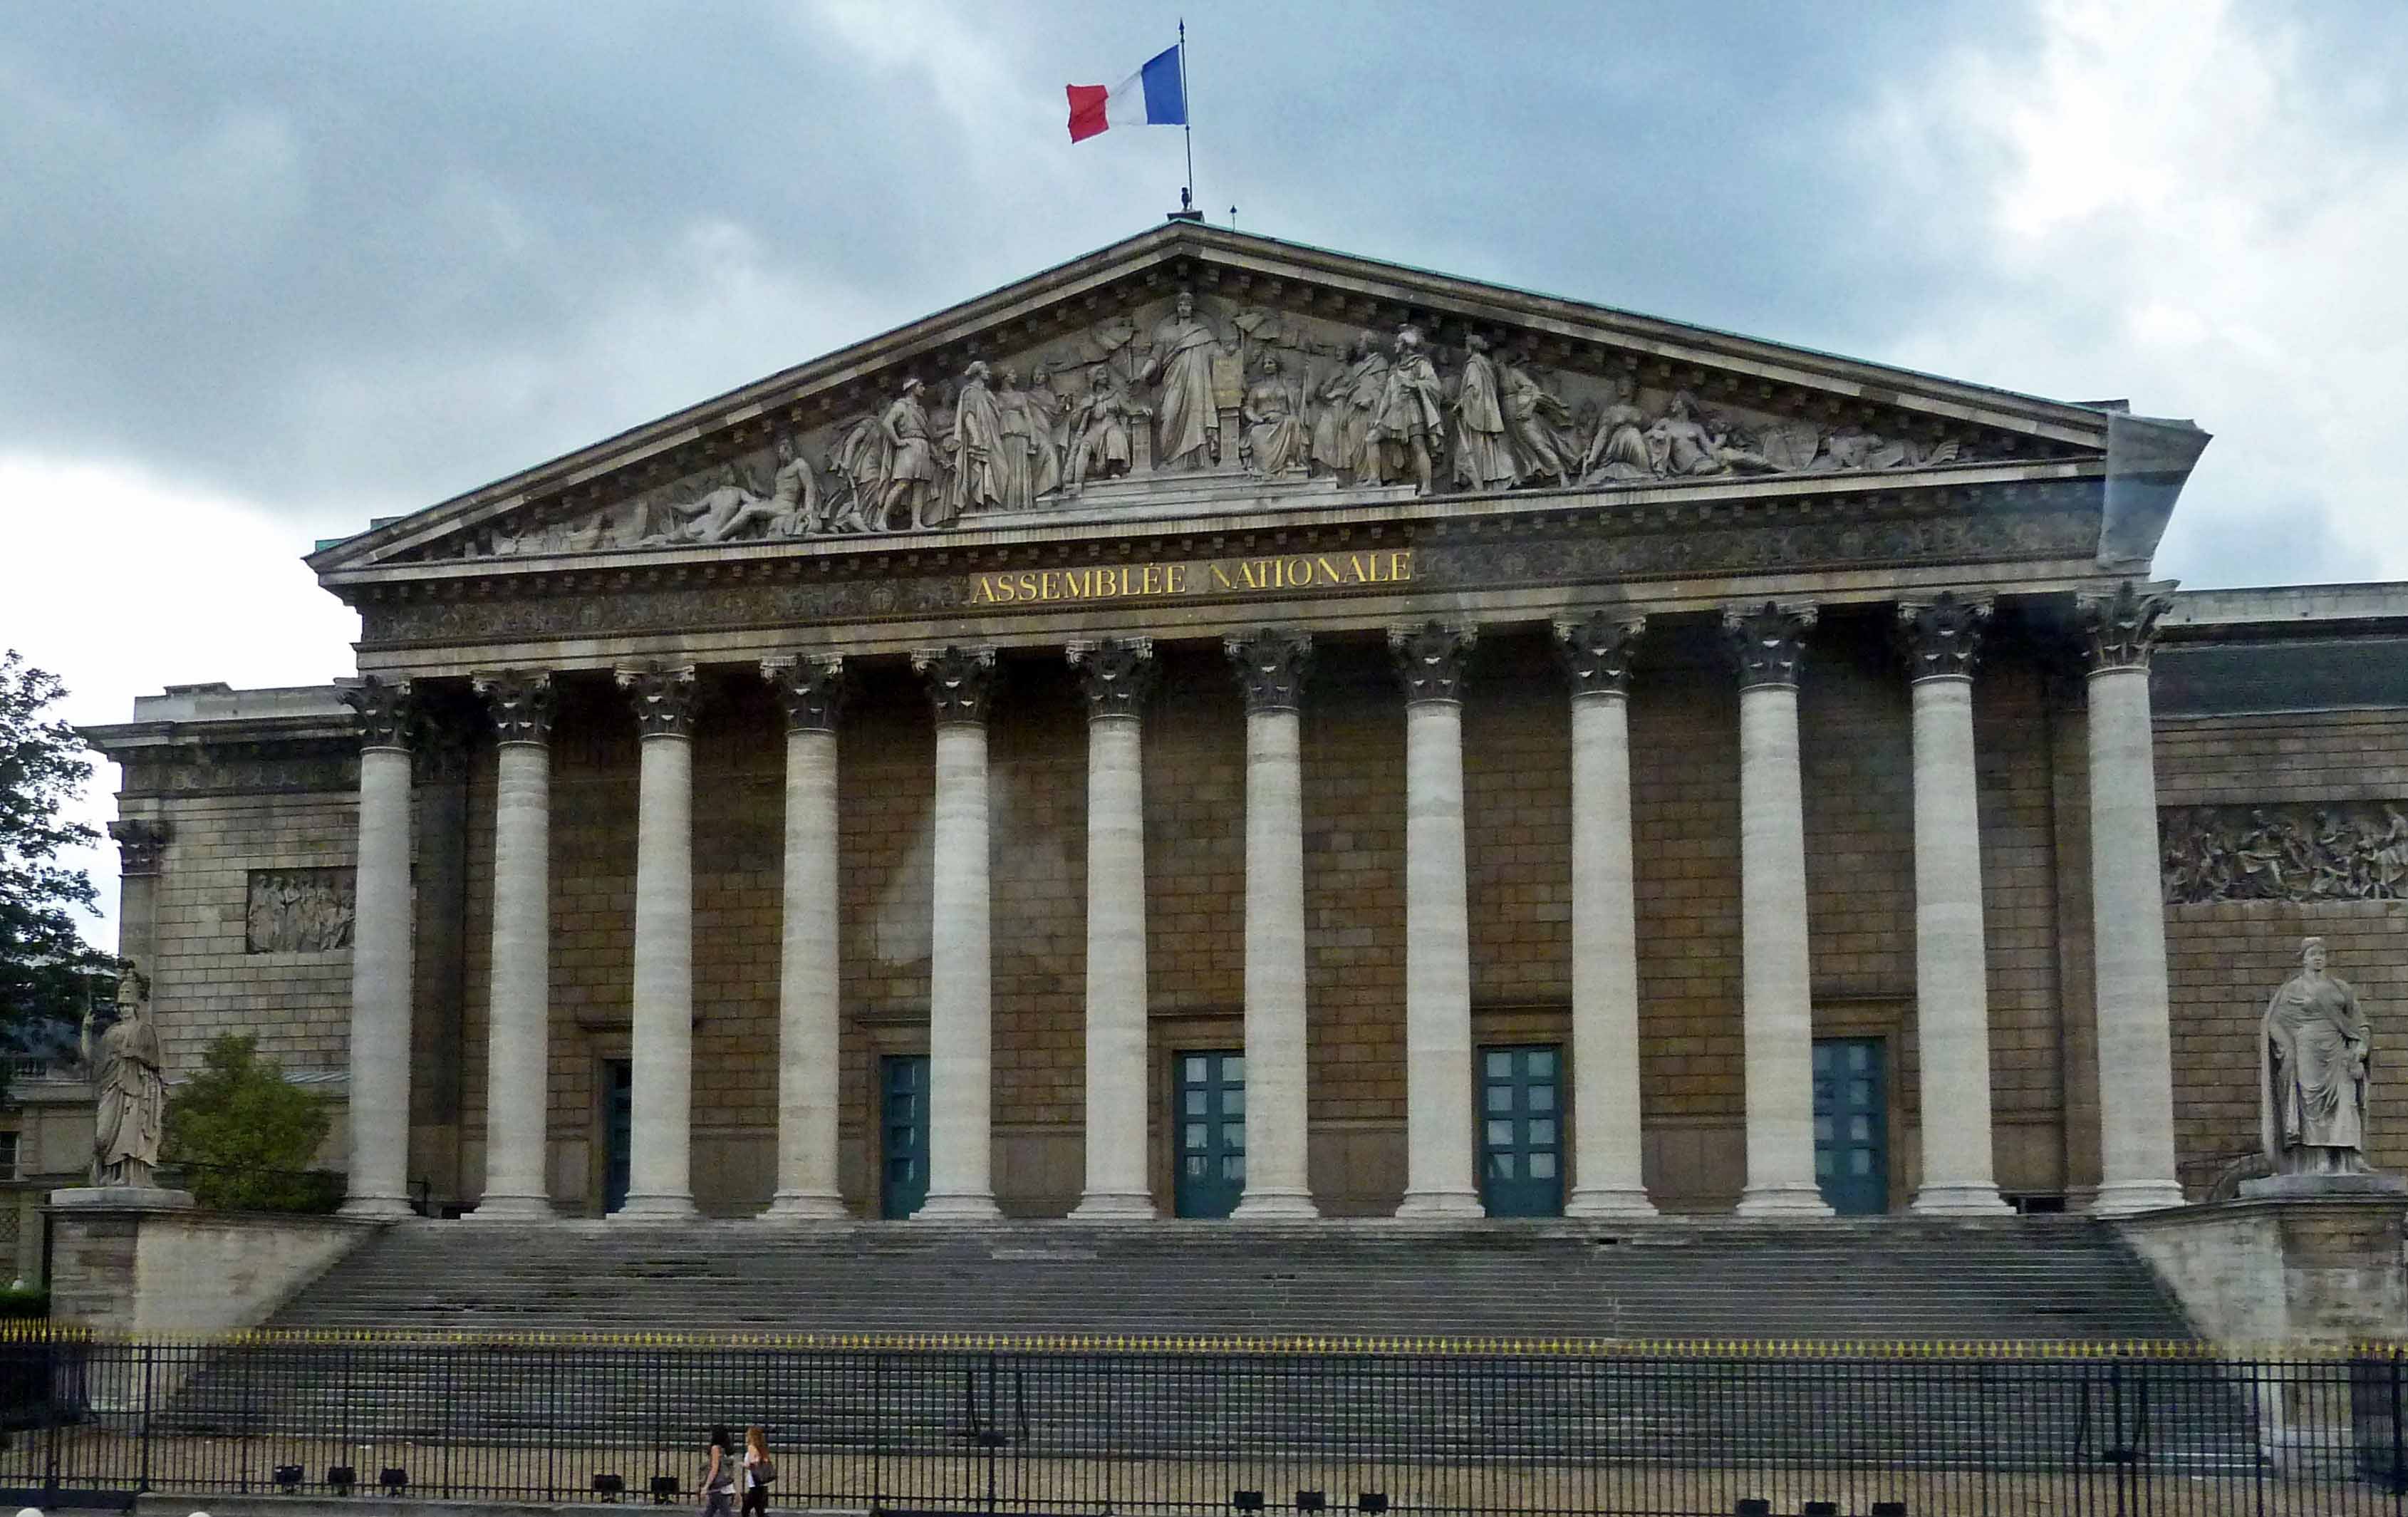 Palais Bourbon (1722-28) [Seat of the French National Assembly]